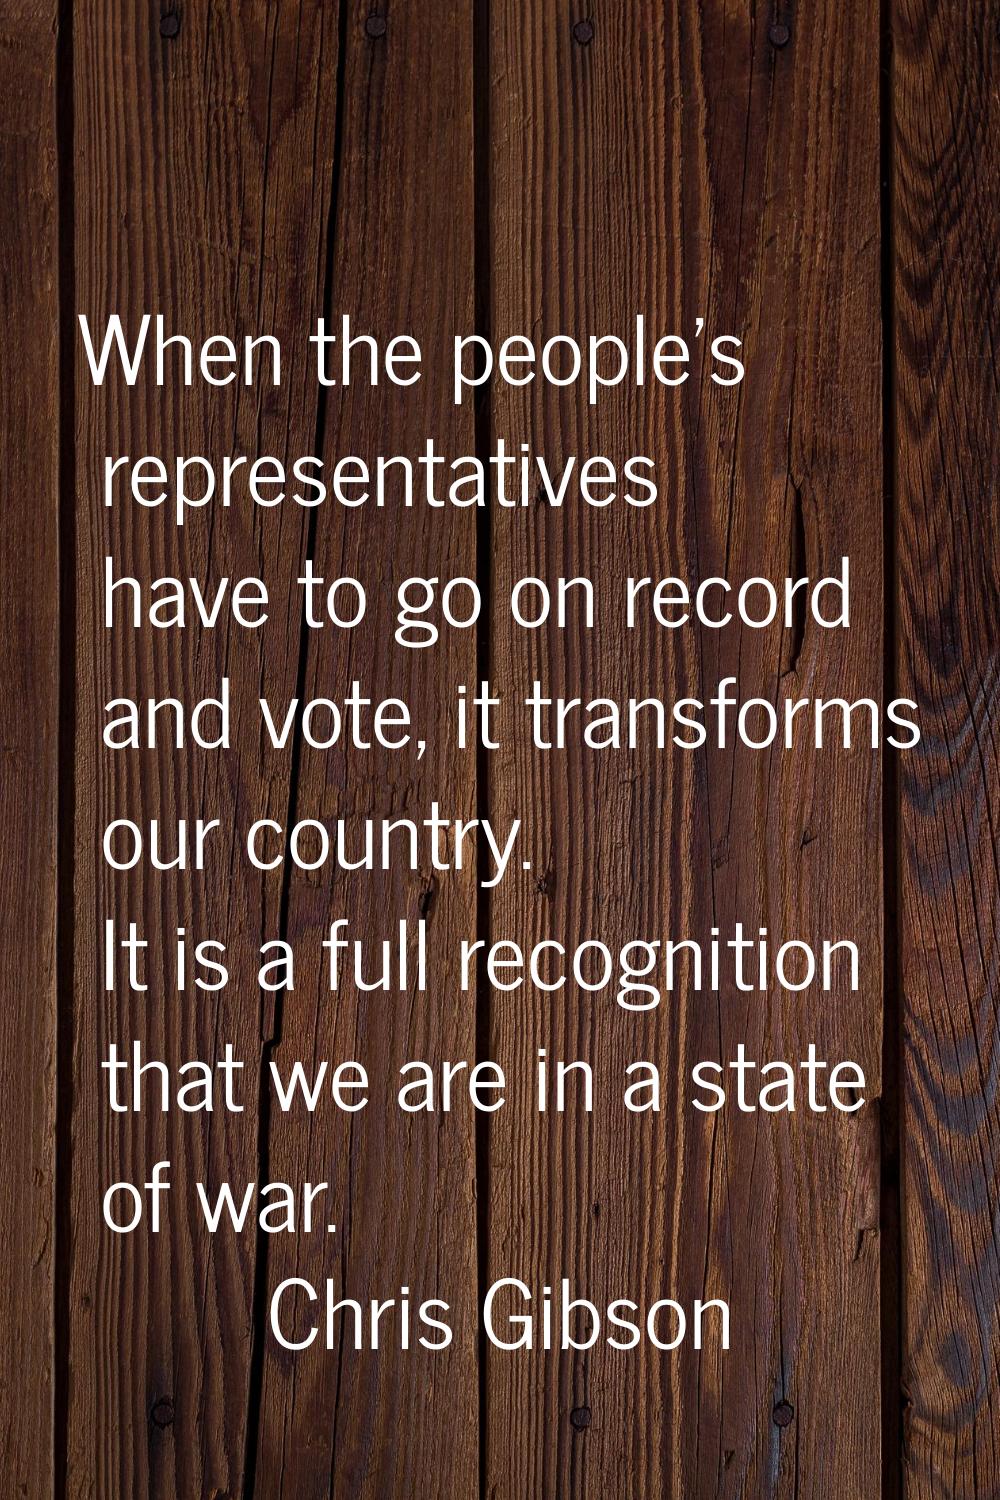 When the people's representatives have to go on record and vote, it transforms our country. It is a